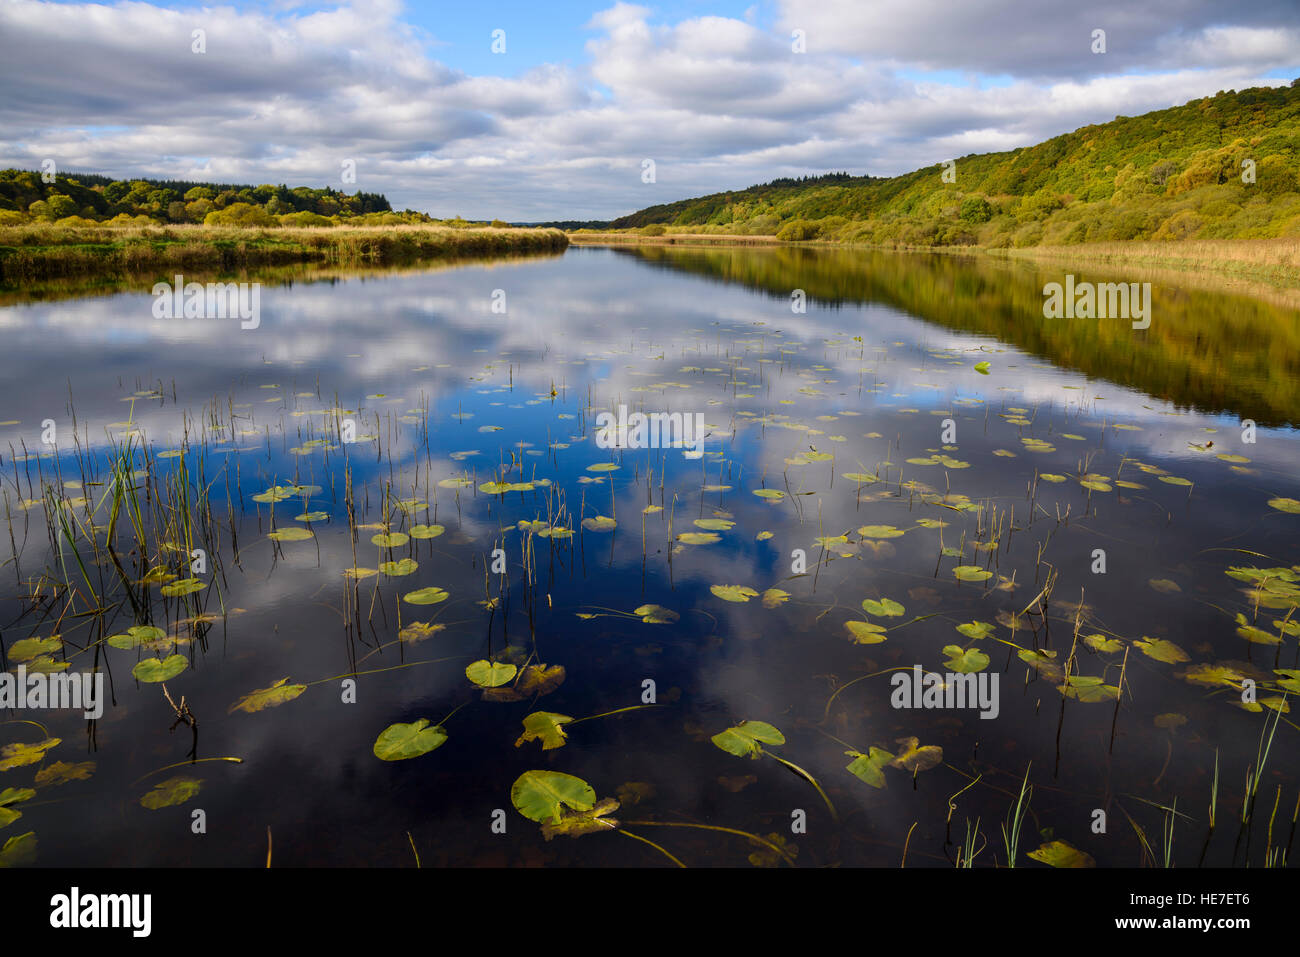 Otter Pool on the River Cree, Dumfries & Galloway, Scotland Stock Photo